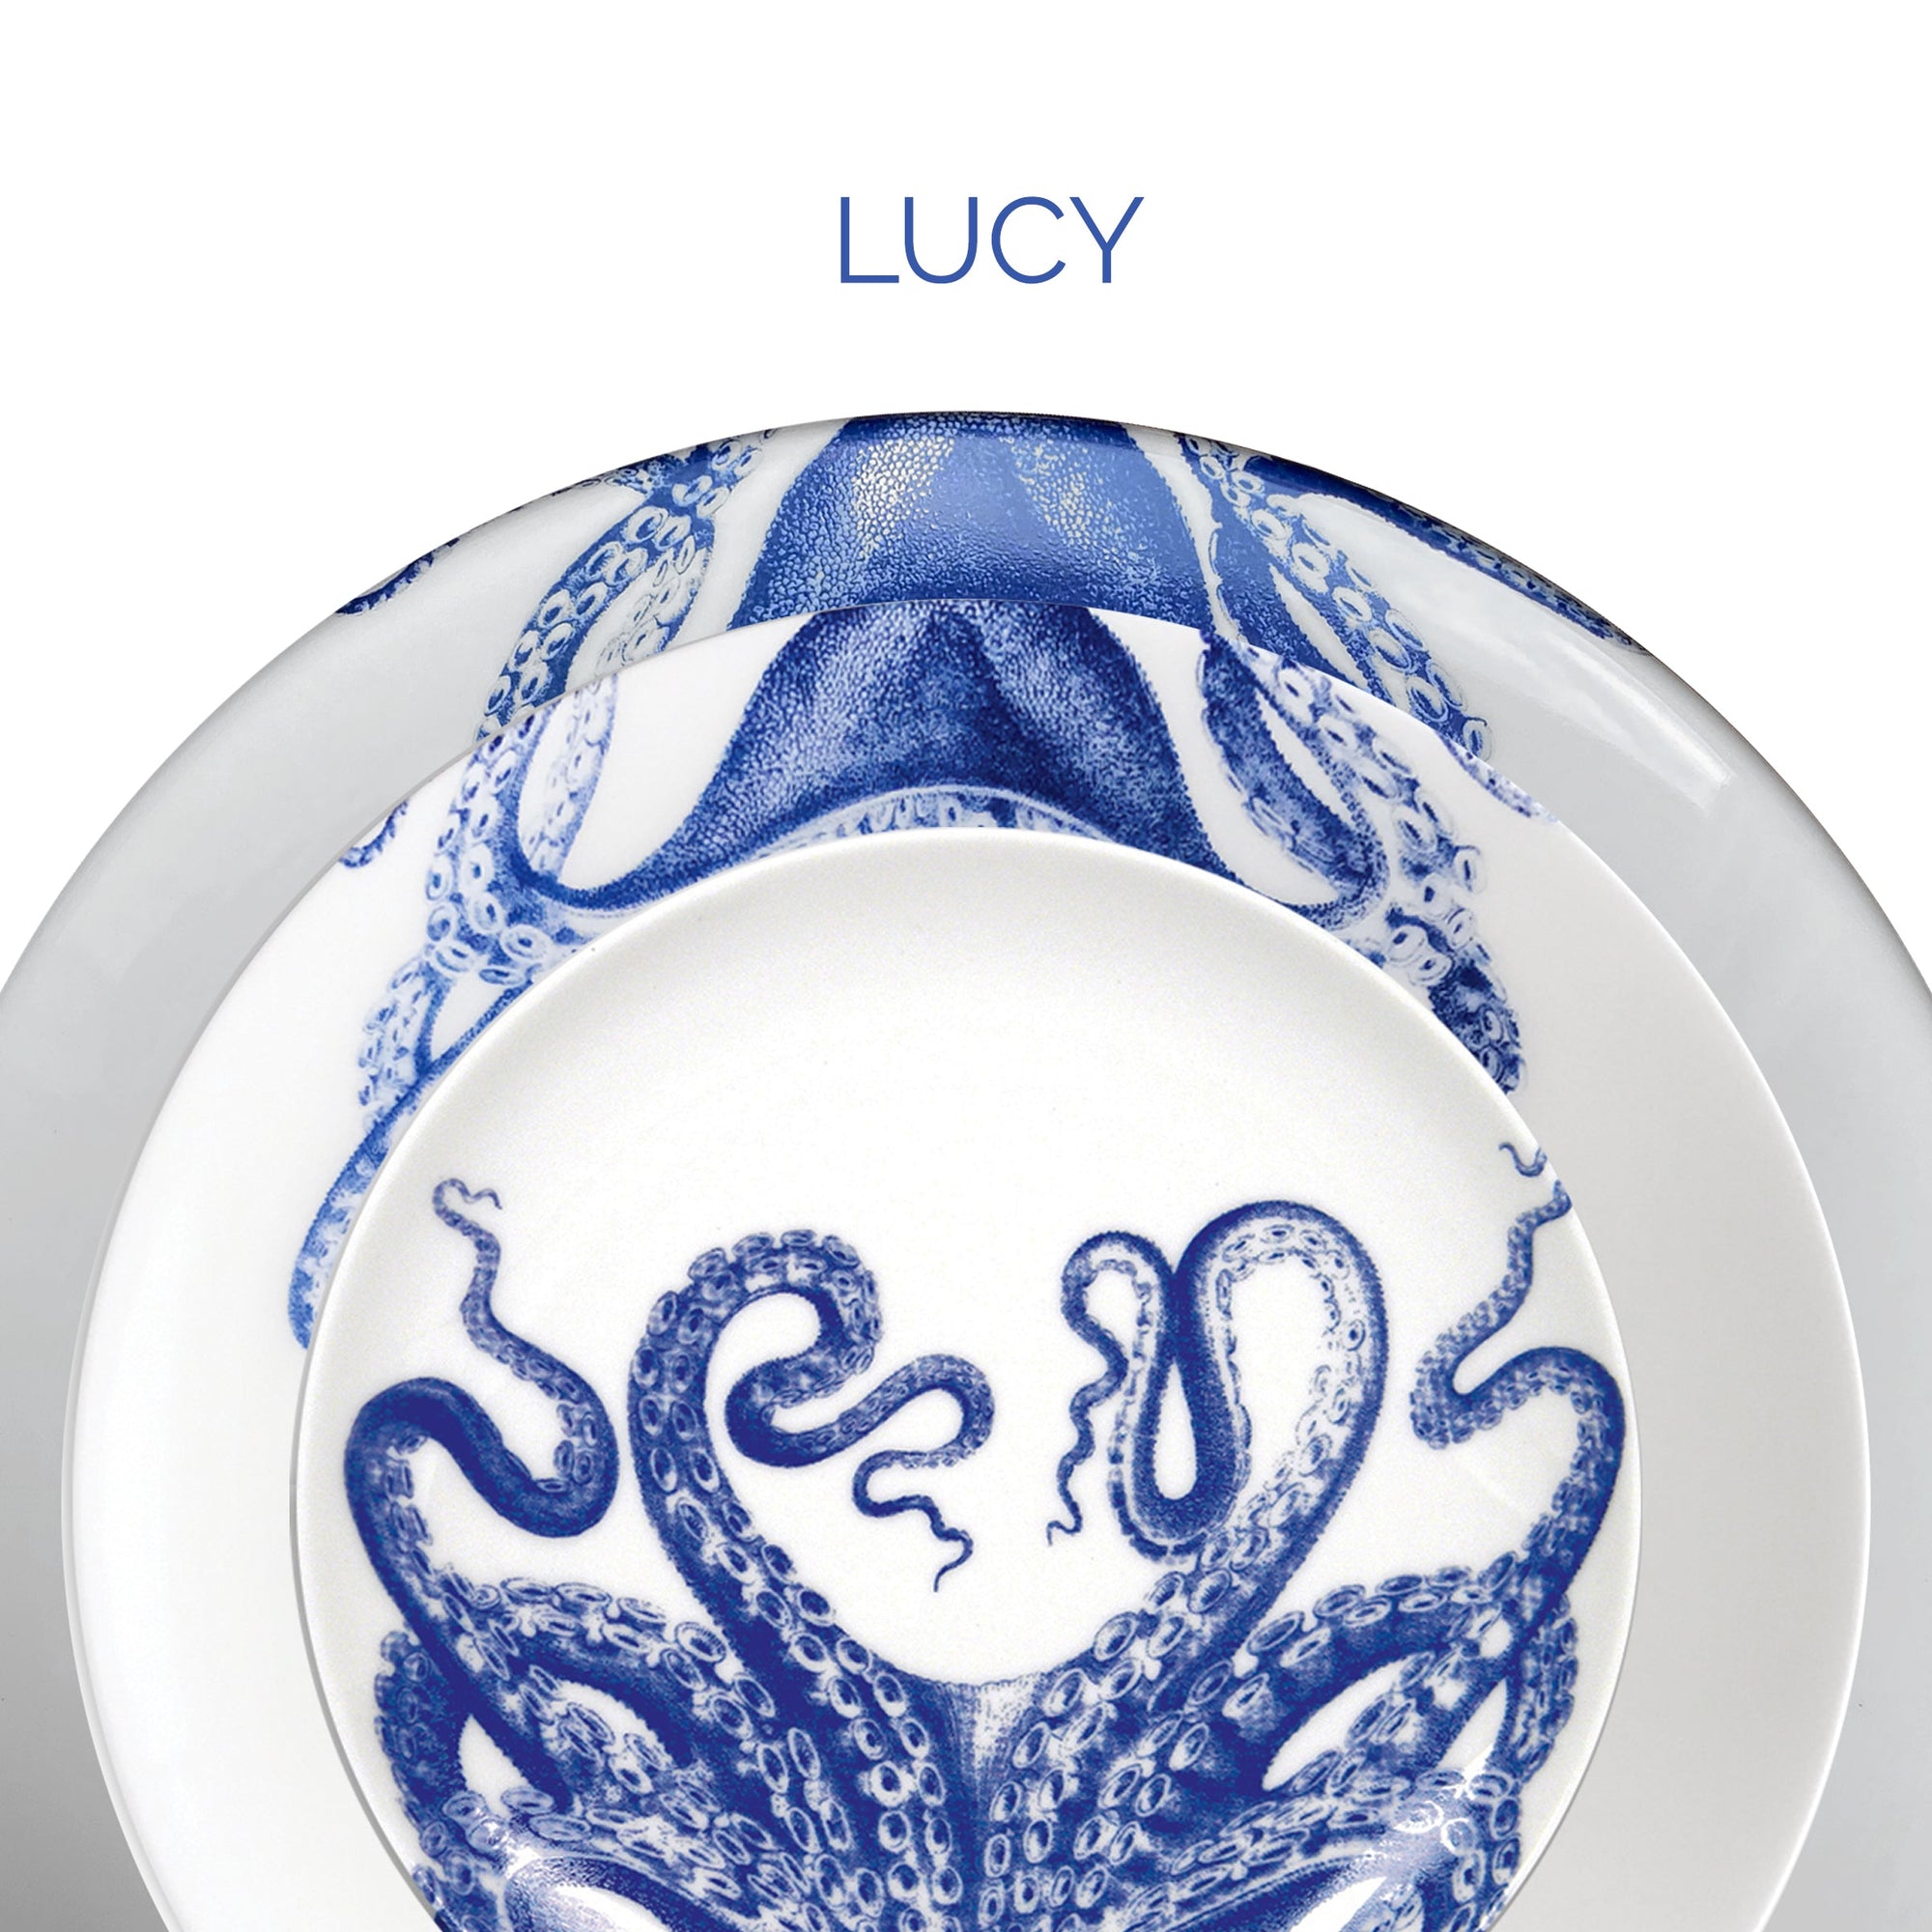 A plate with an octopus design on it.